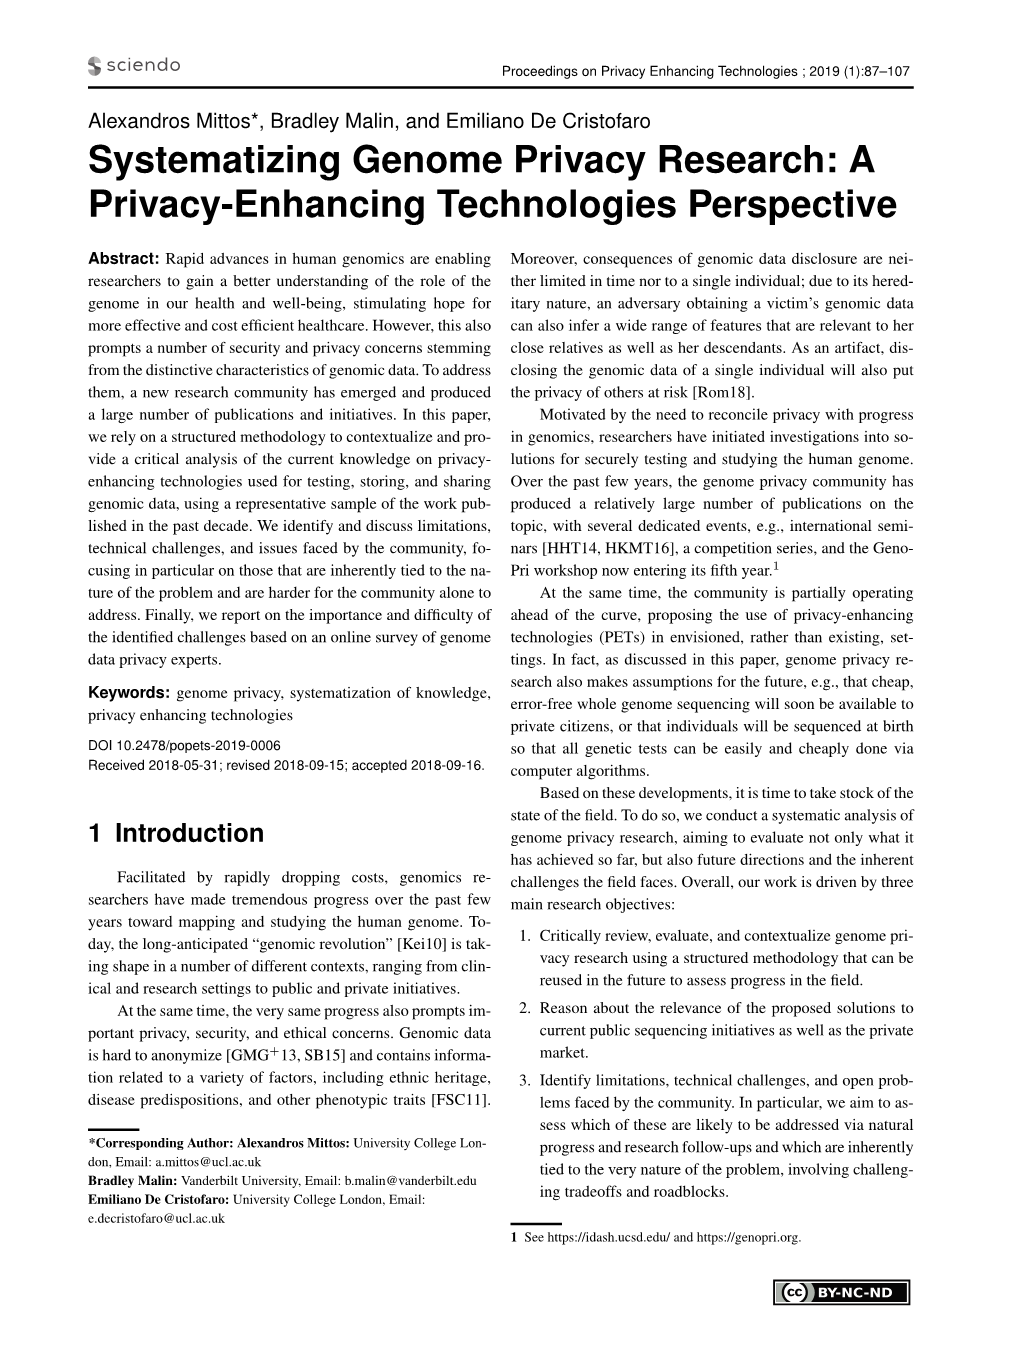 Systematizing Genome Privacy Research: a Privacy-Enhancing Technologies Perspective